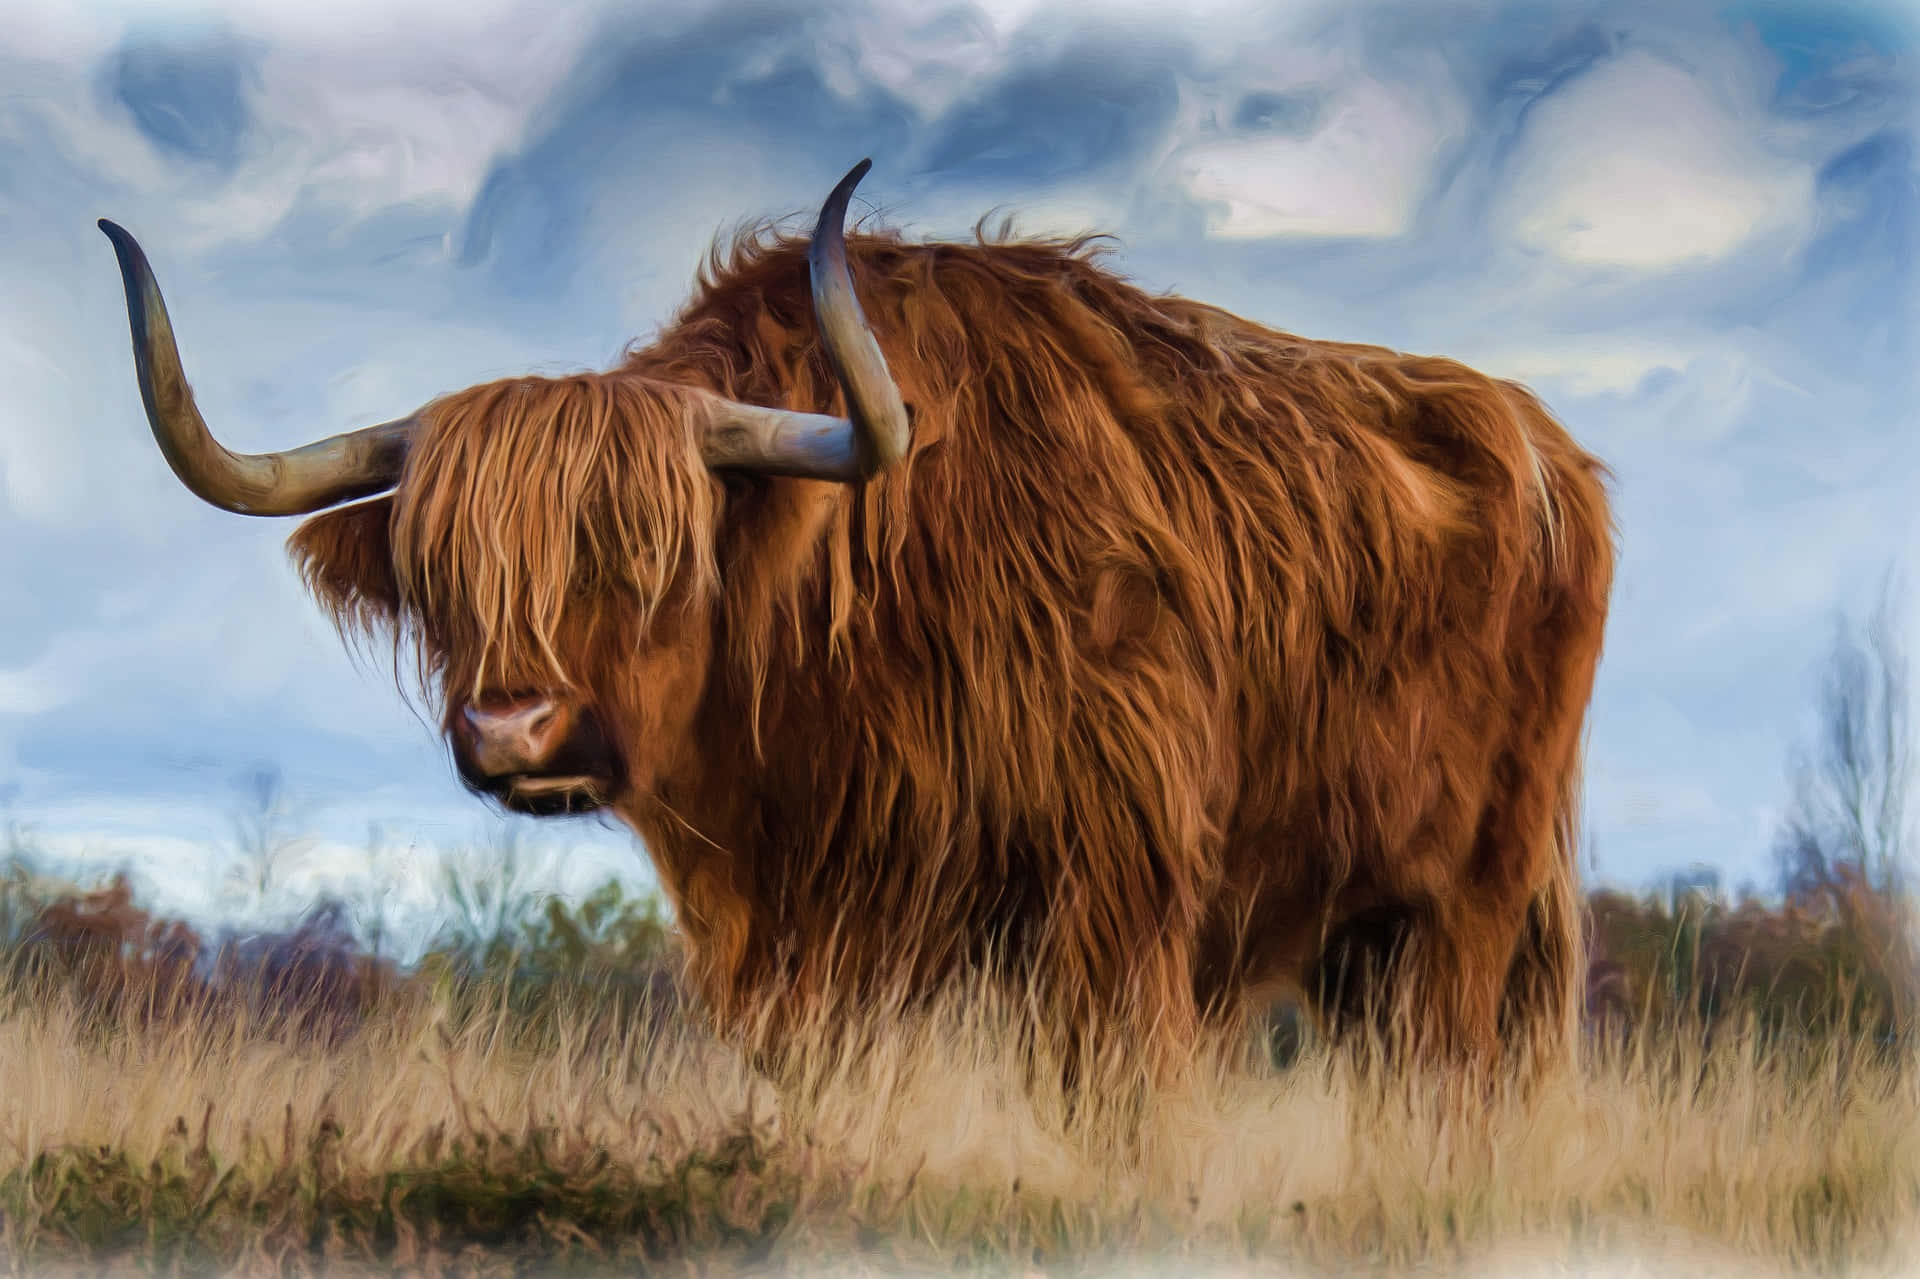 A Beautiful Brown Cow Stands in the Field Wallpaper